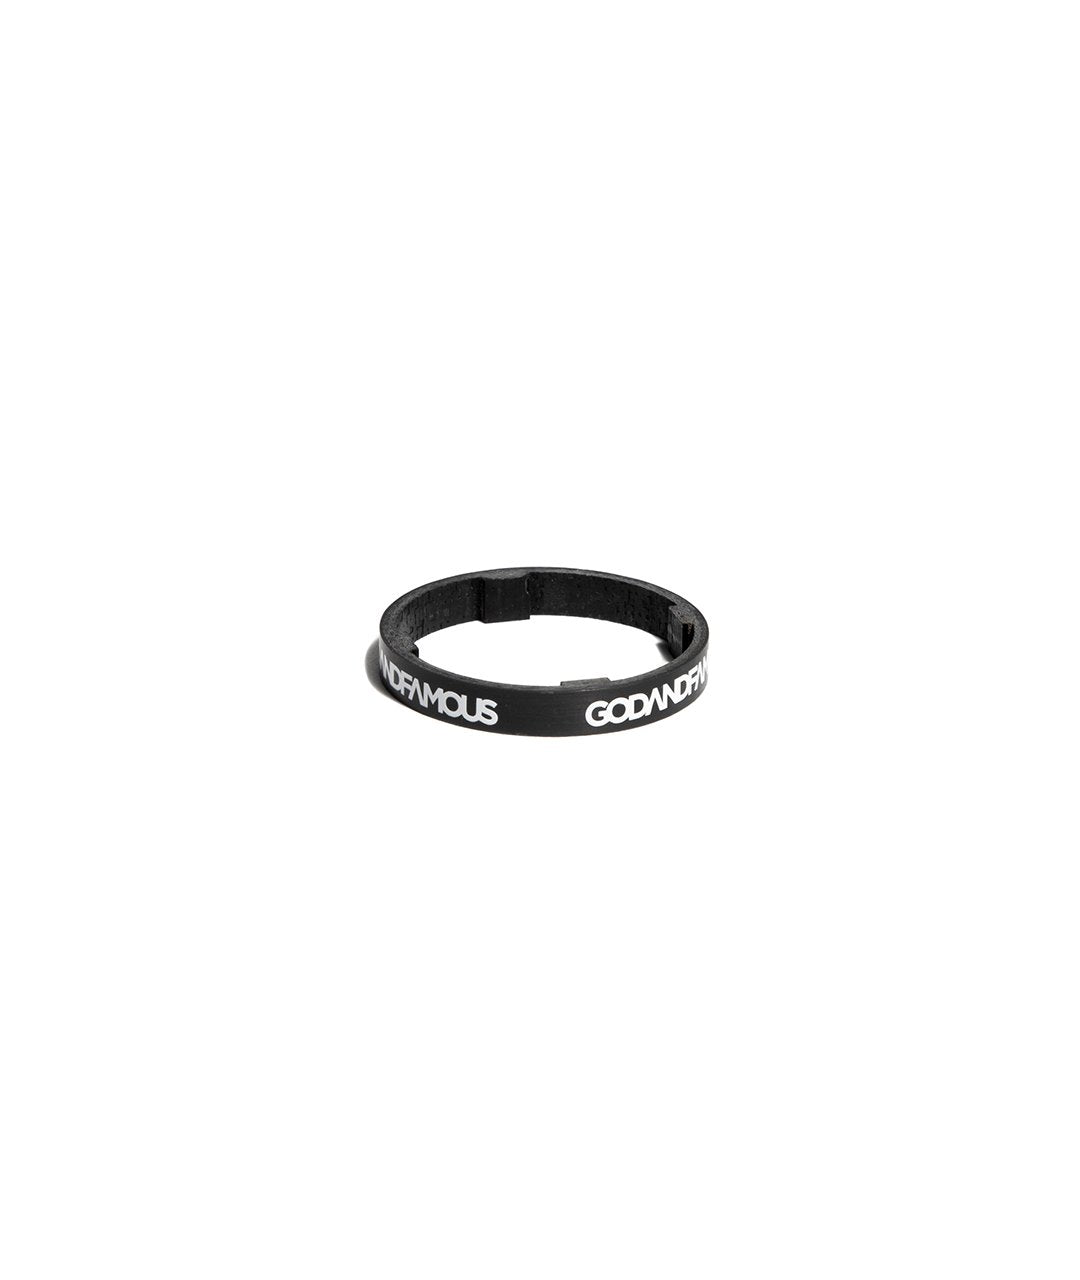 God & Famous Repeat 5mm Headset Spacer